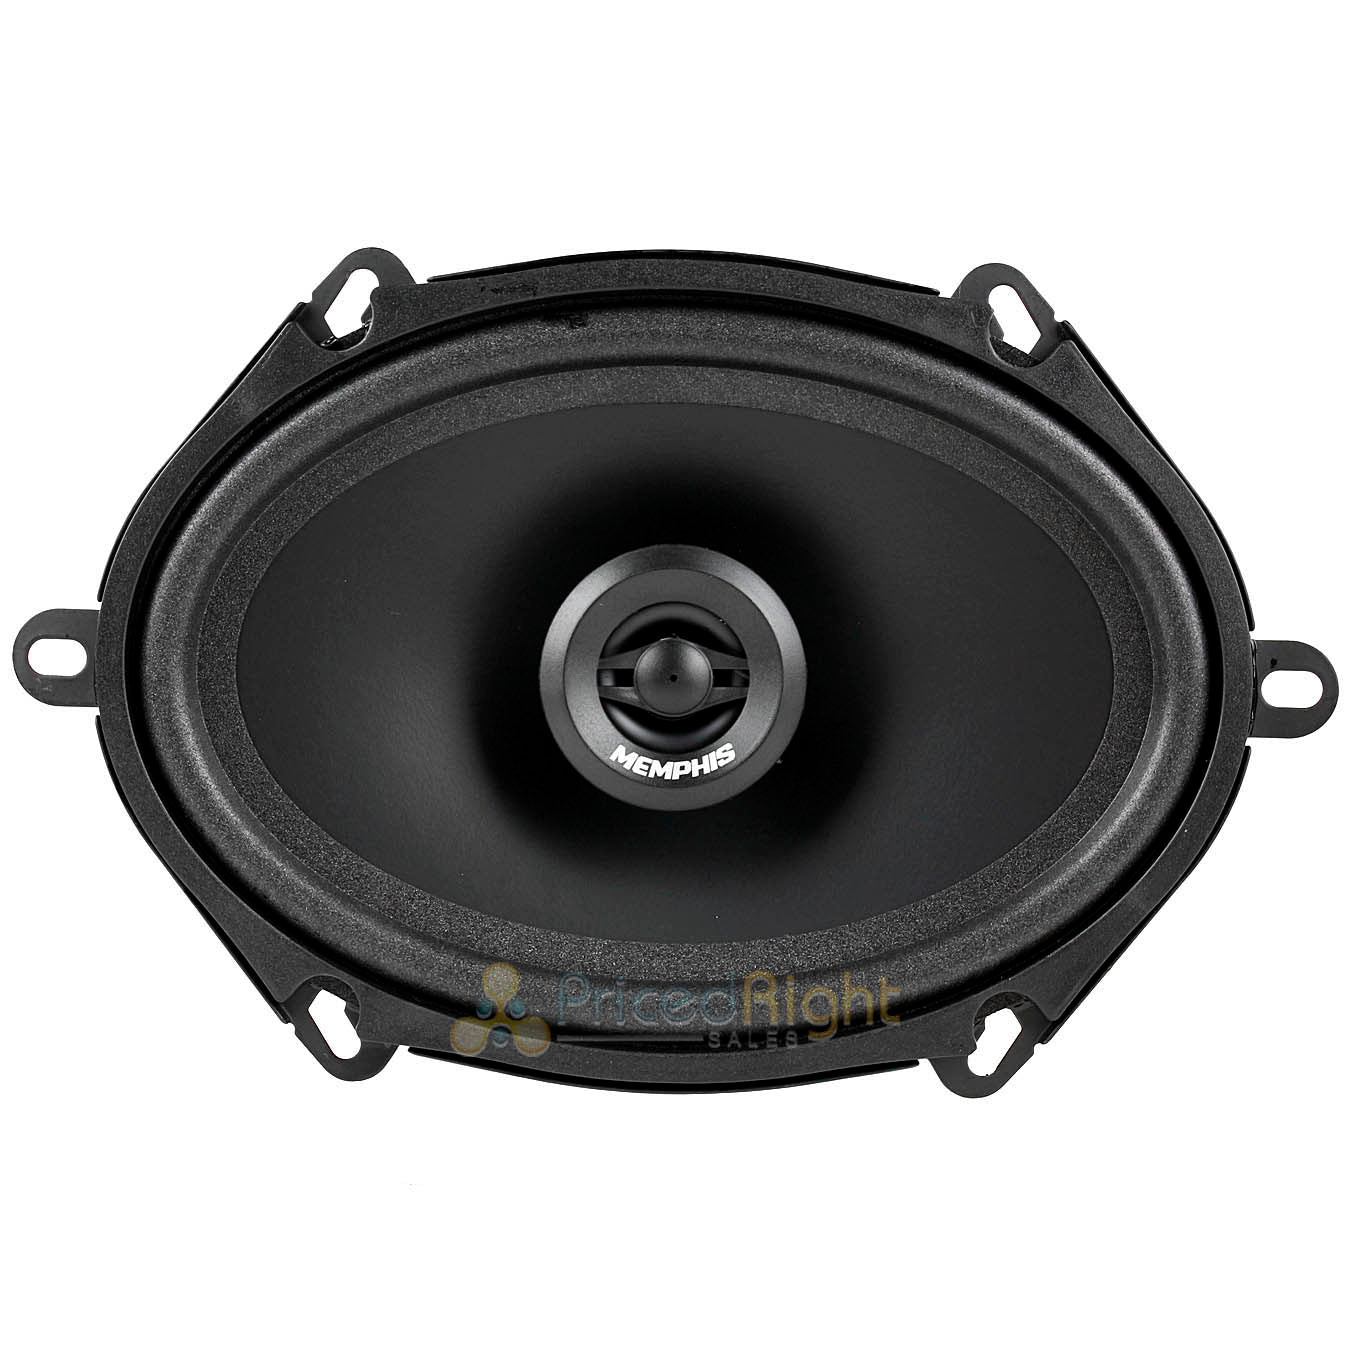 Memphis Audio 5x7" 2Way Coaxial Speakers 120W Max SRX572 Street Reference Series